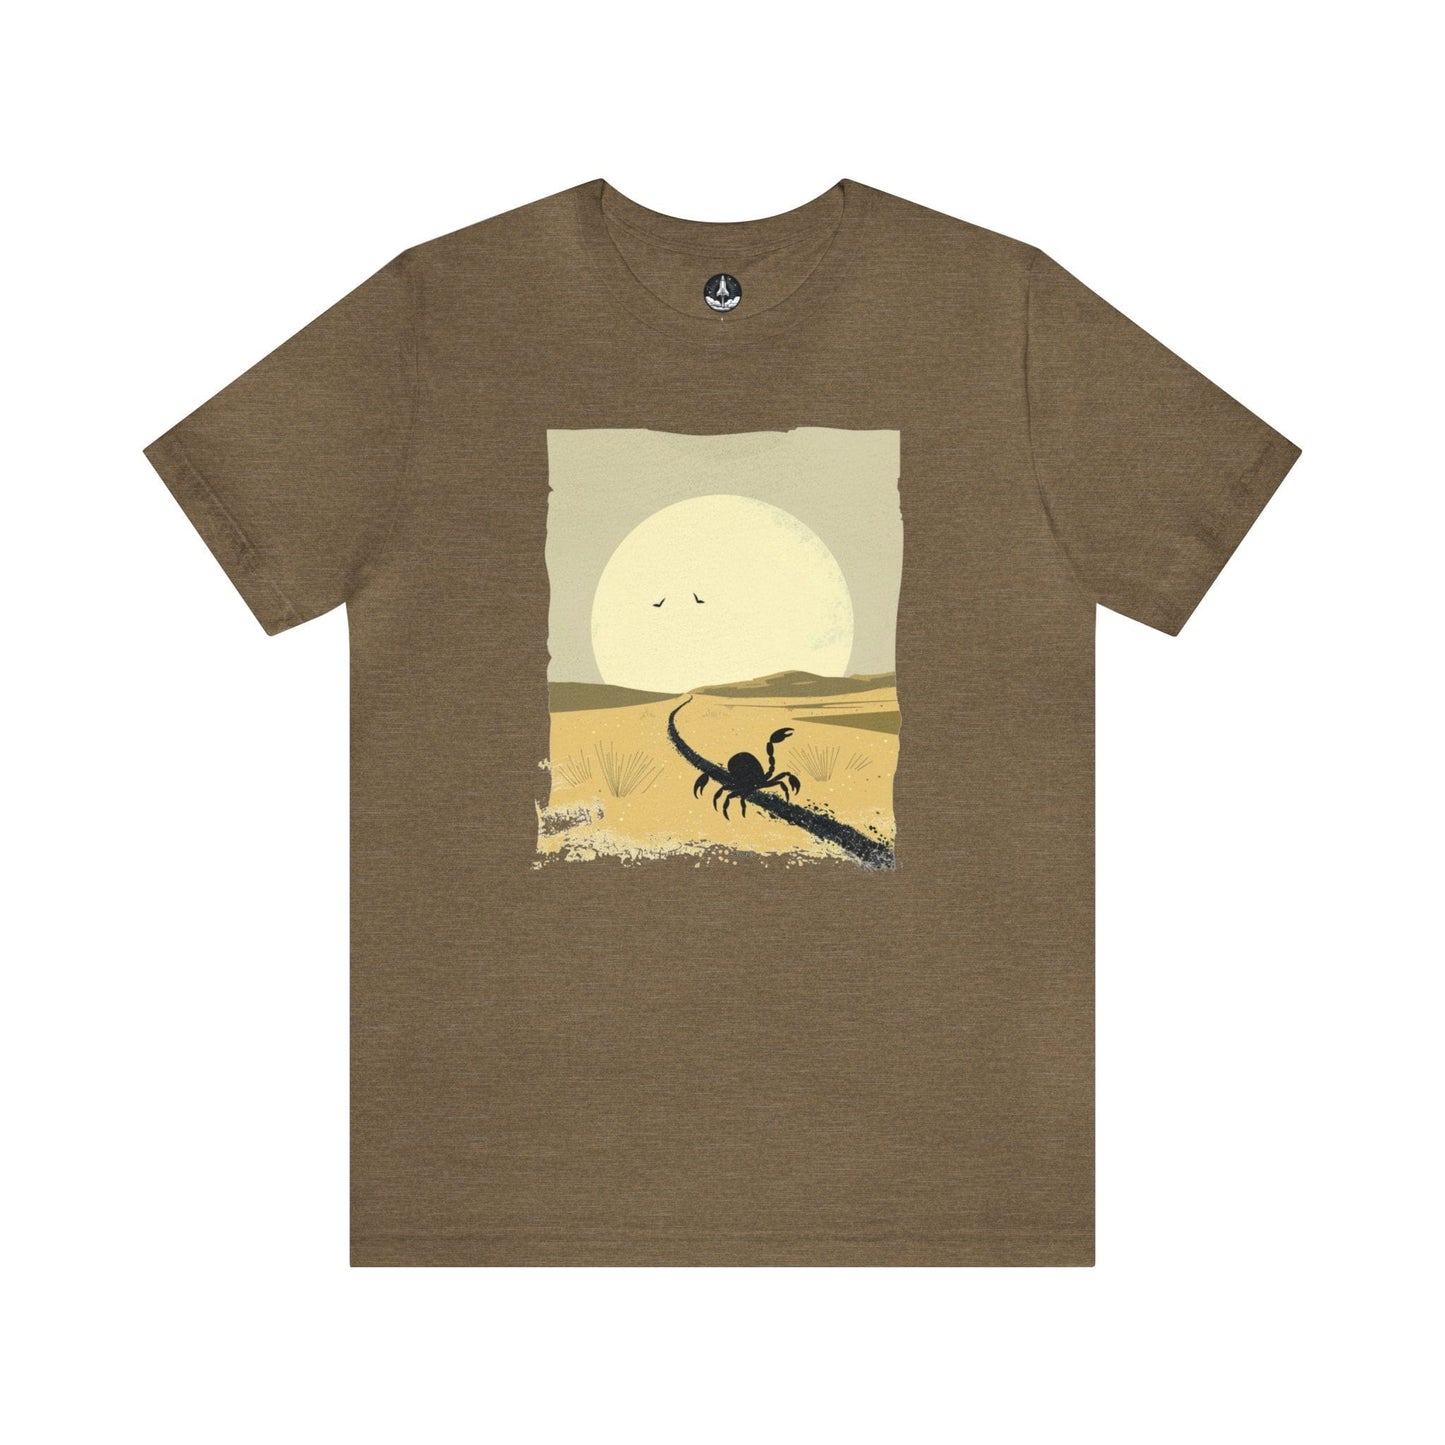 T-Shirt Heather Olive / S Courage in the Shadows Scorpio TShirt